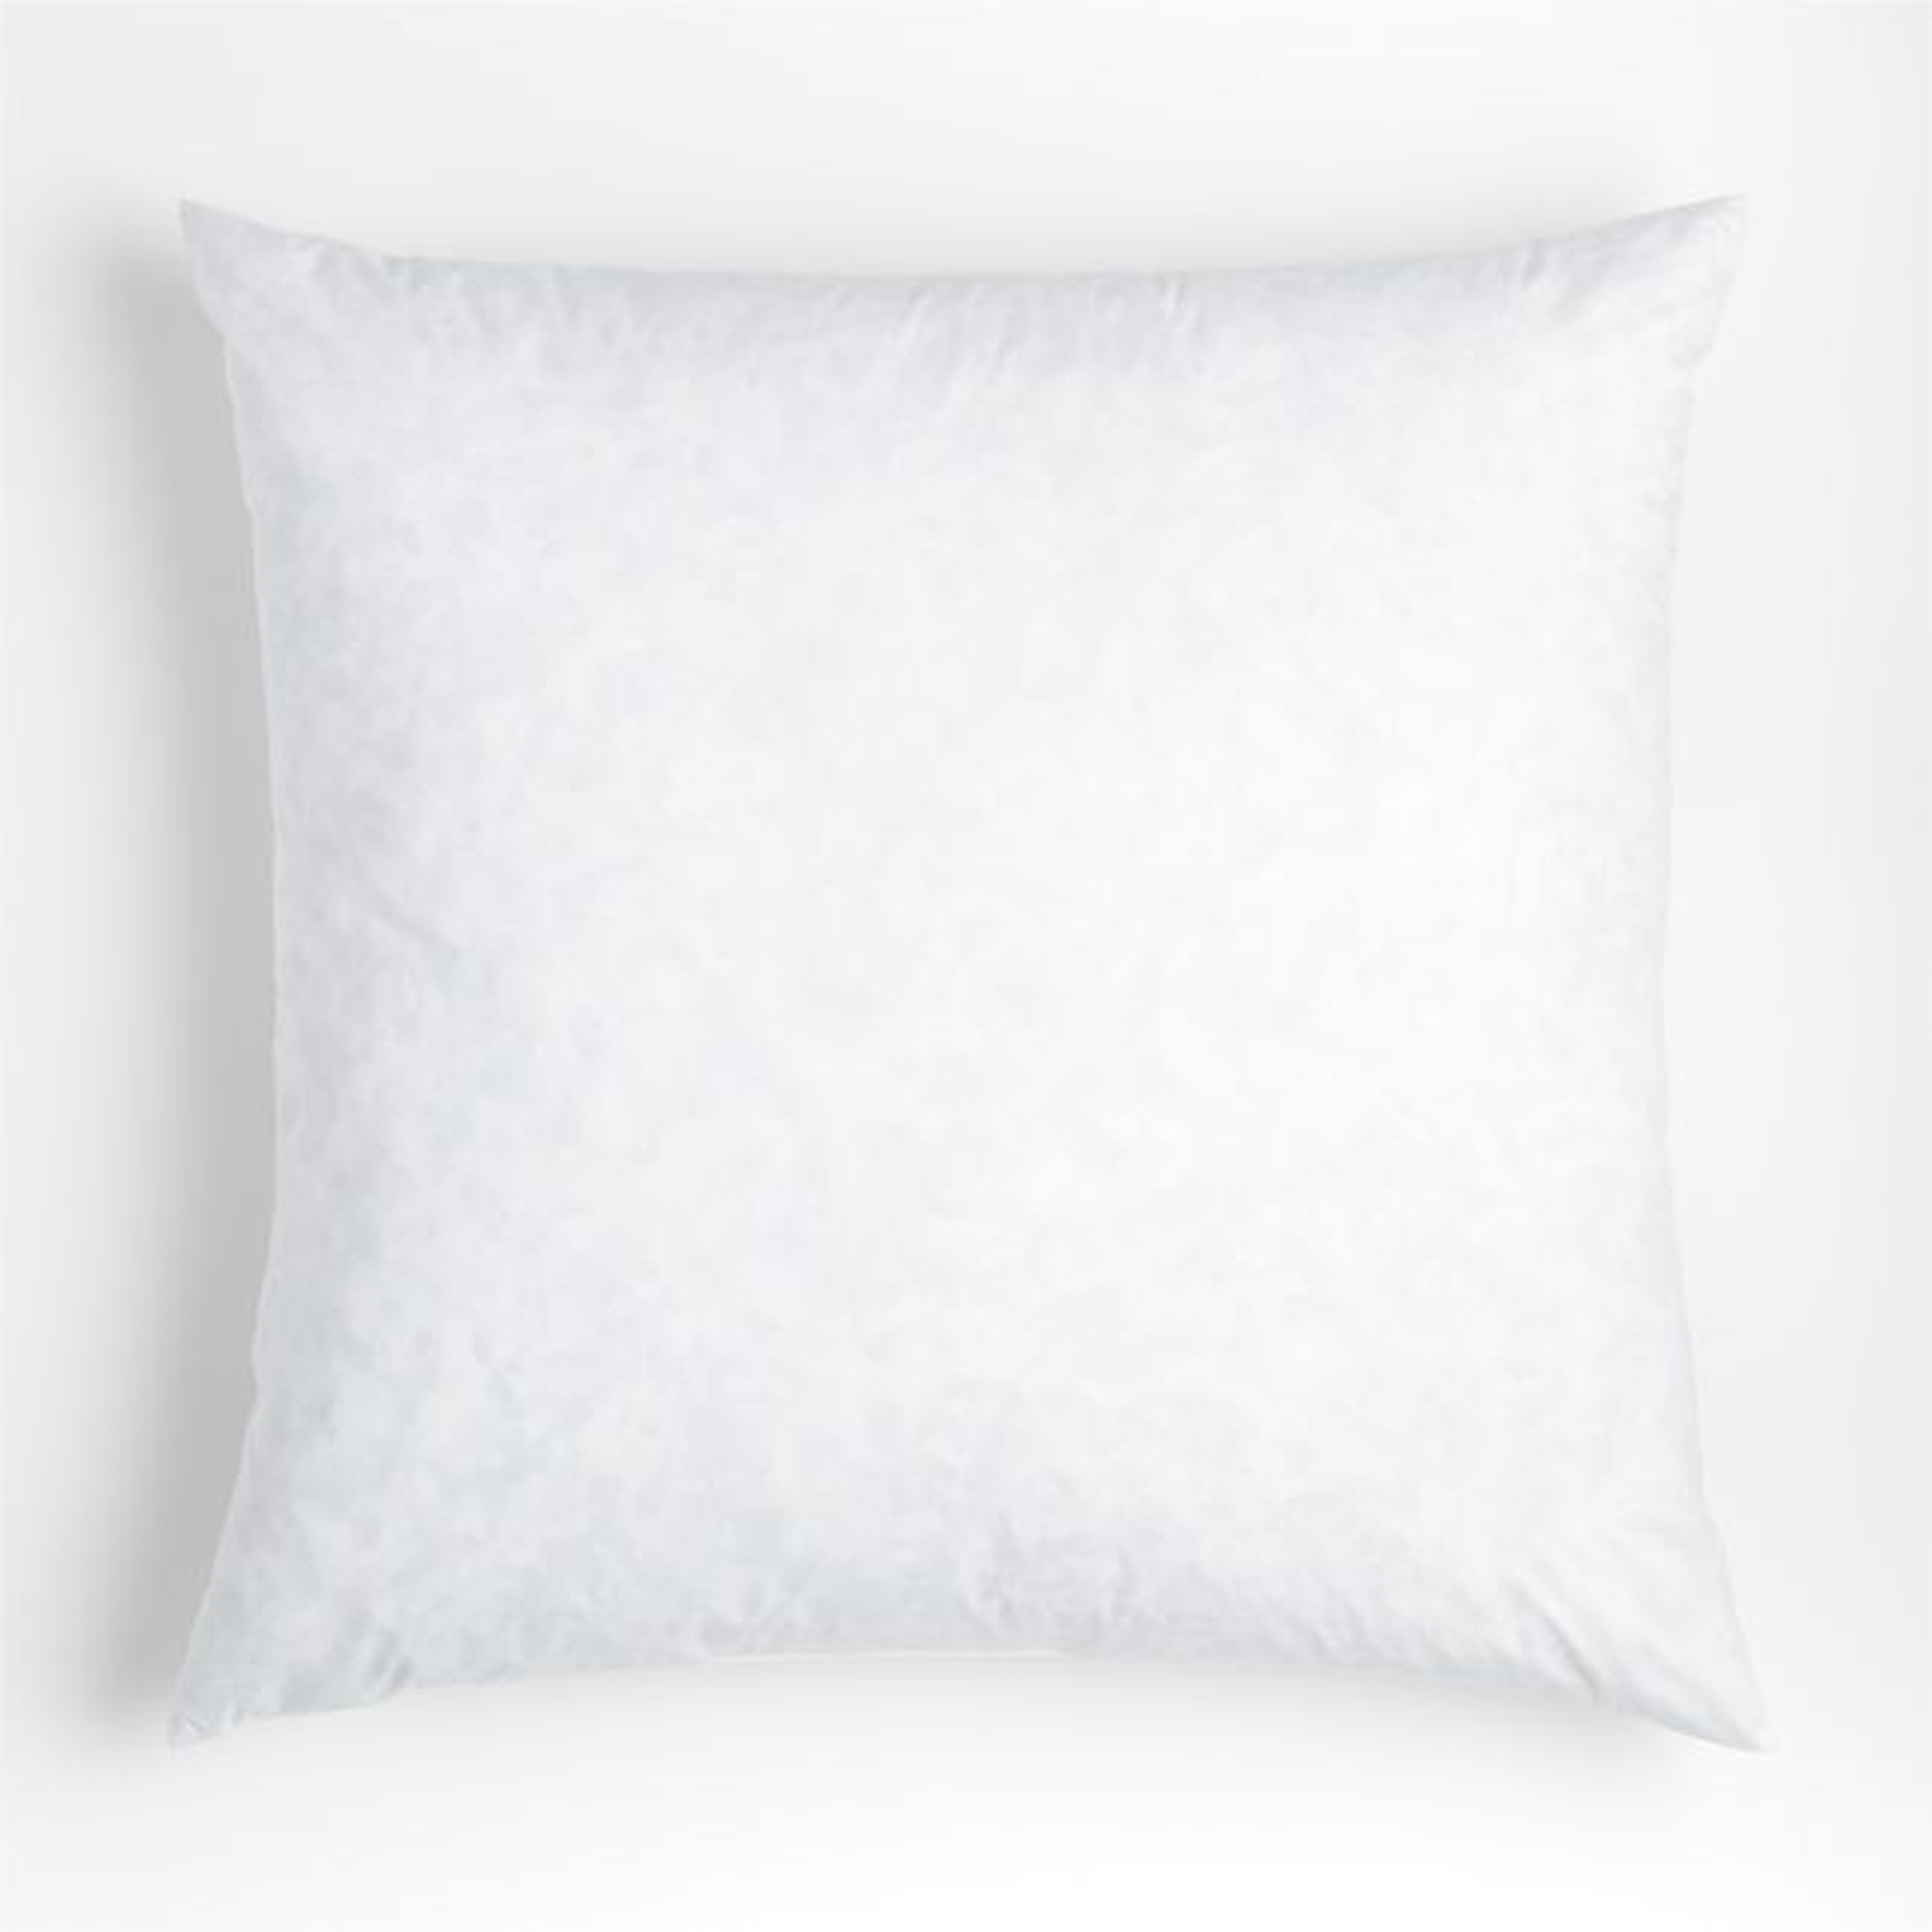 Feather 30"x30" Pillow Insert - Crate and Barrel